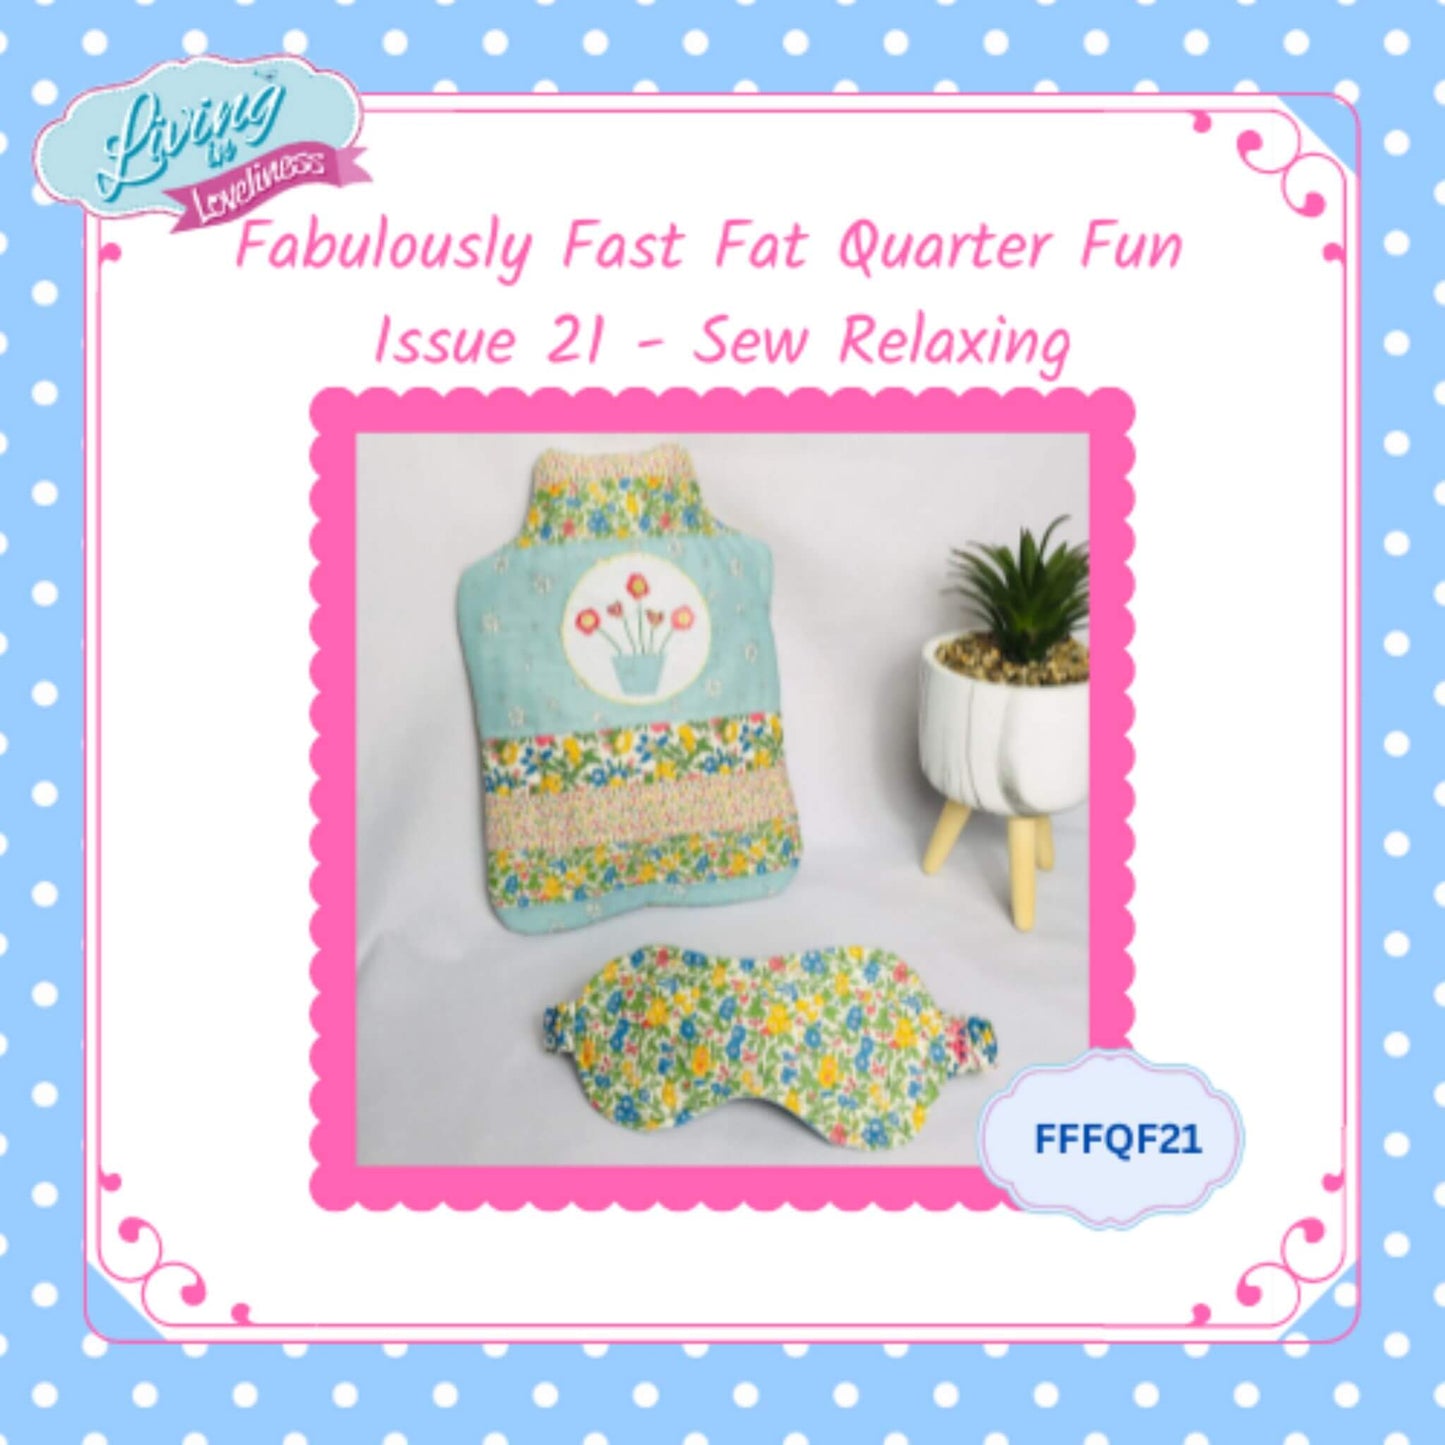 Issue 21 - Sew Relaxing - The Fabulously Fast Fat Quarter Fun Series by Living in Loveliness